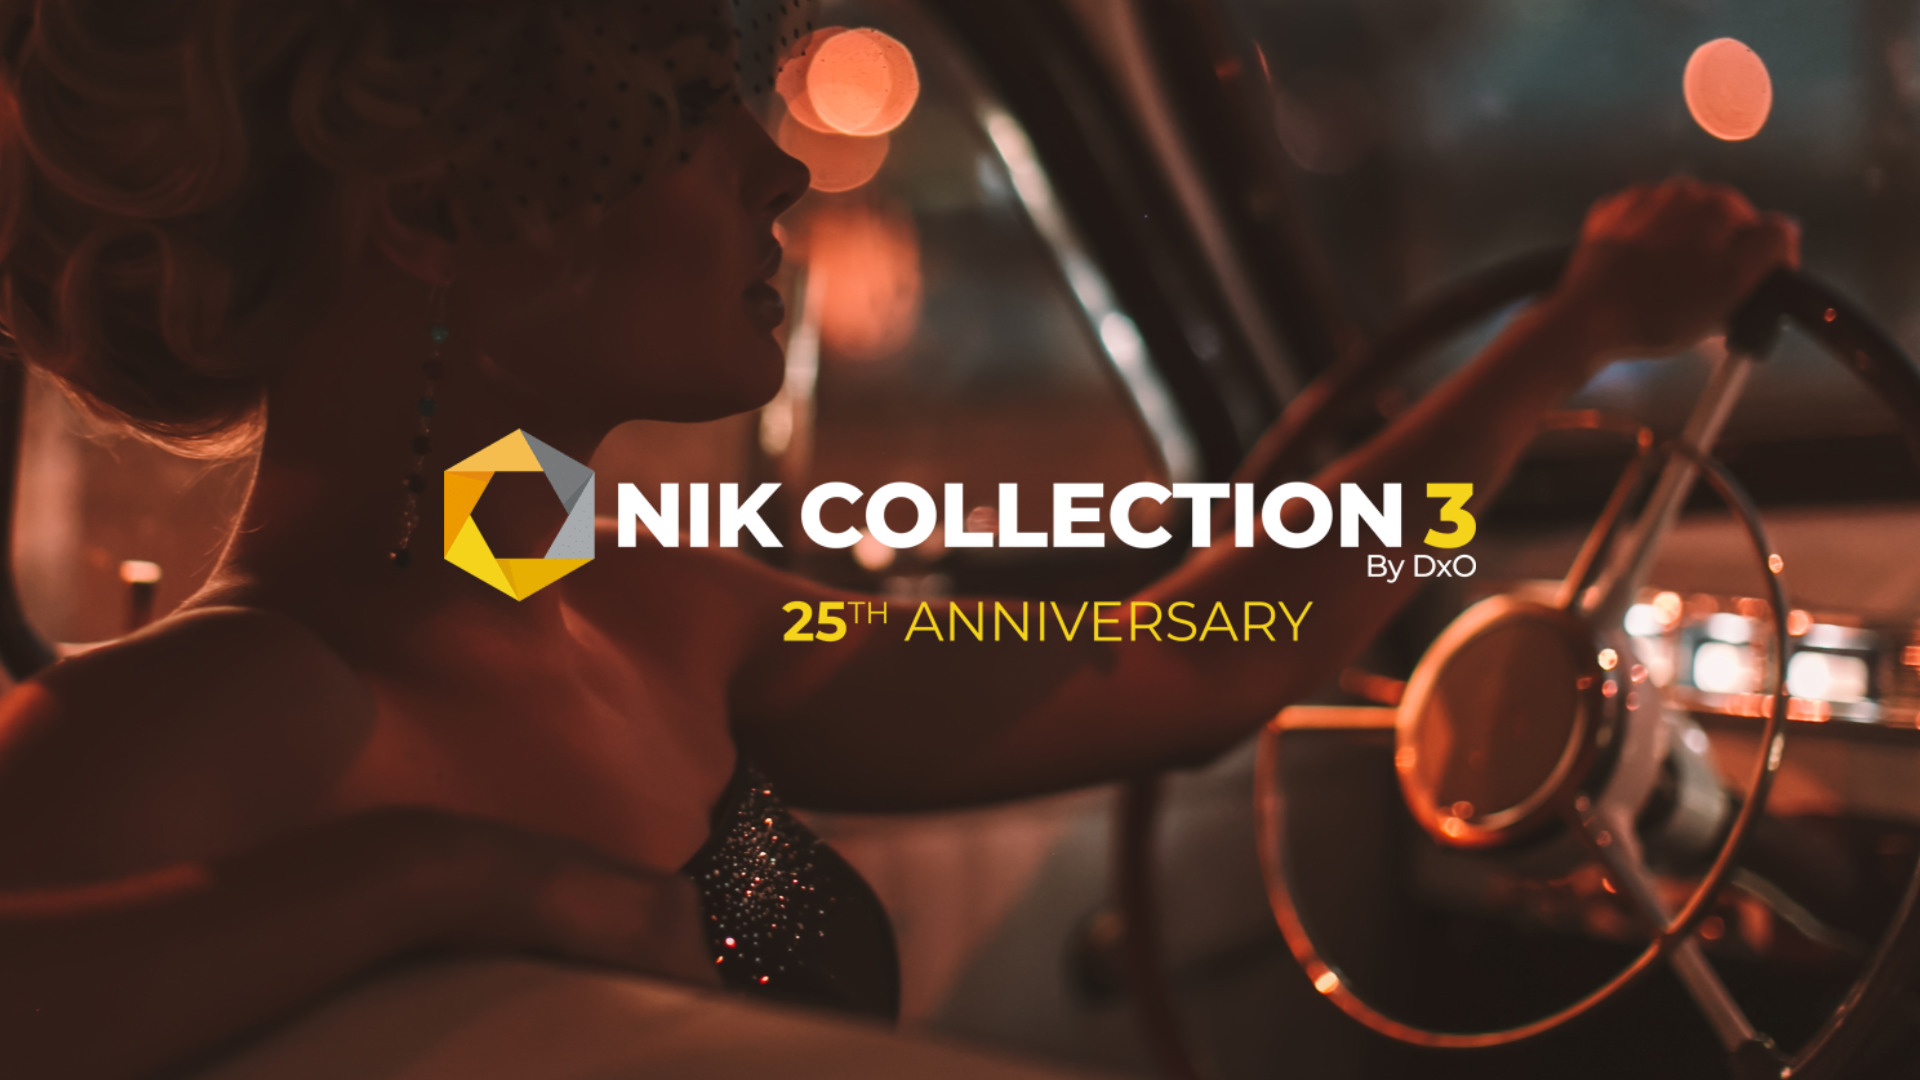 Nik collection 2012